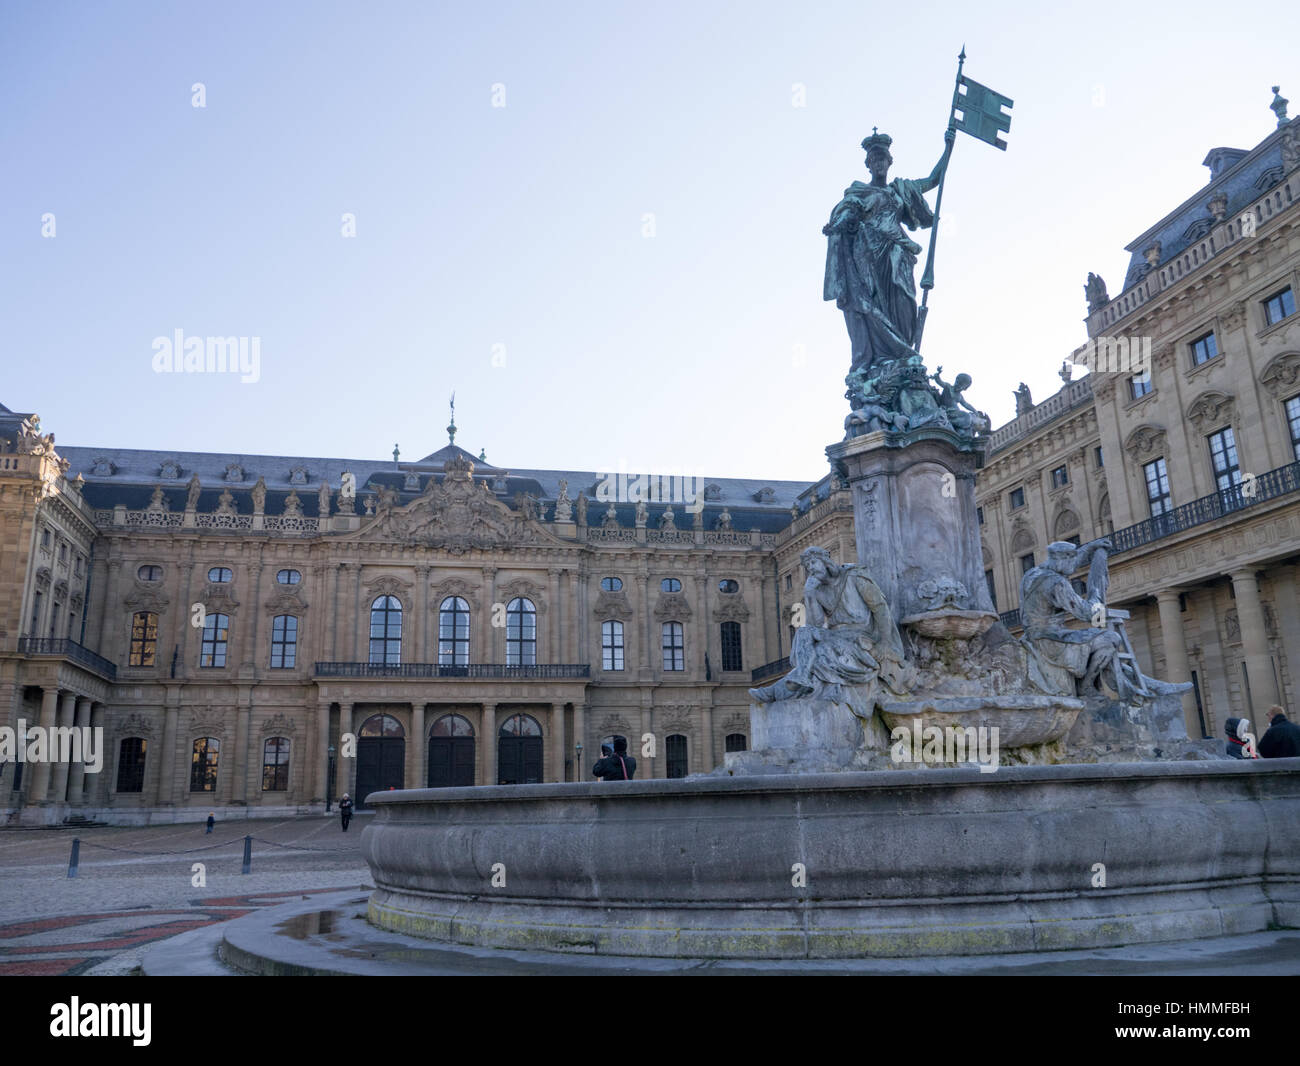 Wurzburg Residenz, world heritage site in Germany.Wurzburg is starting point of Romantic Road. Stock Photo